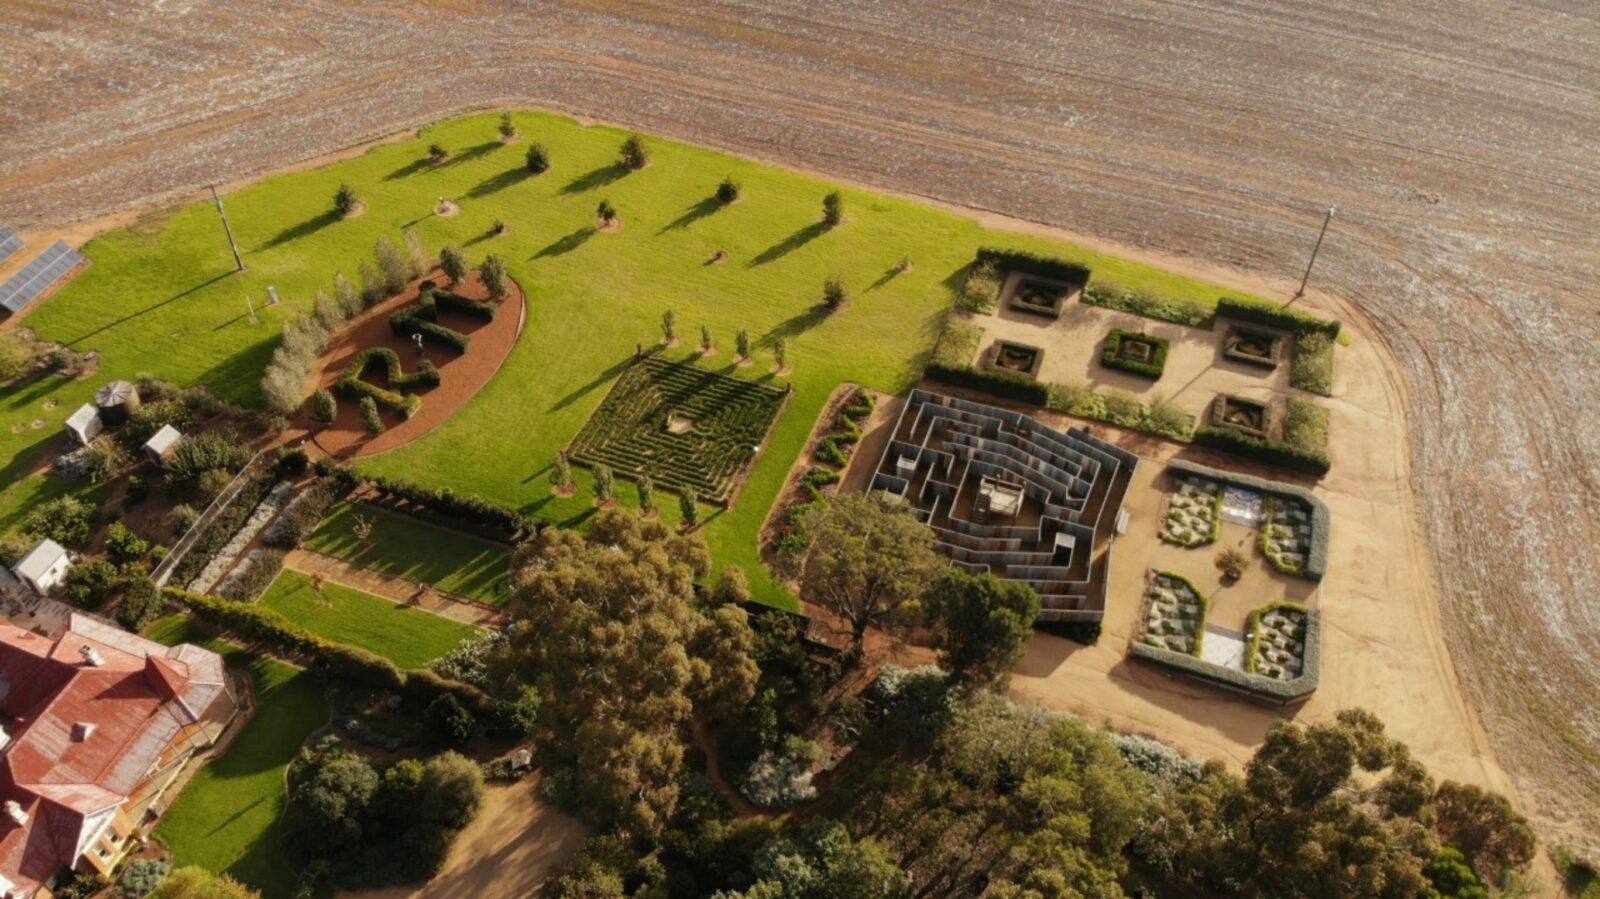 Solve a riddle, get lost in a maze at the Glencara Rustic Maze open day on Sunday June 11.